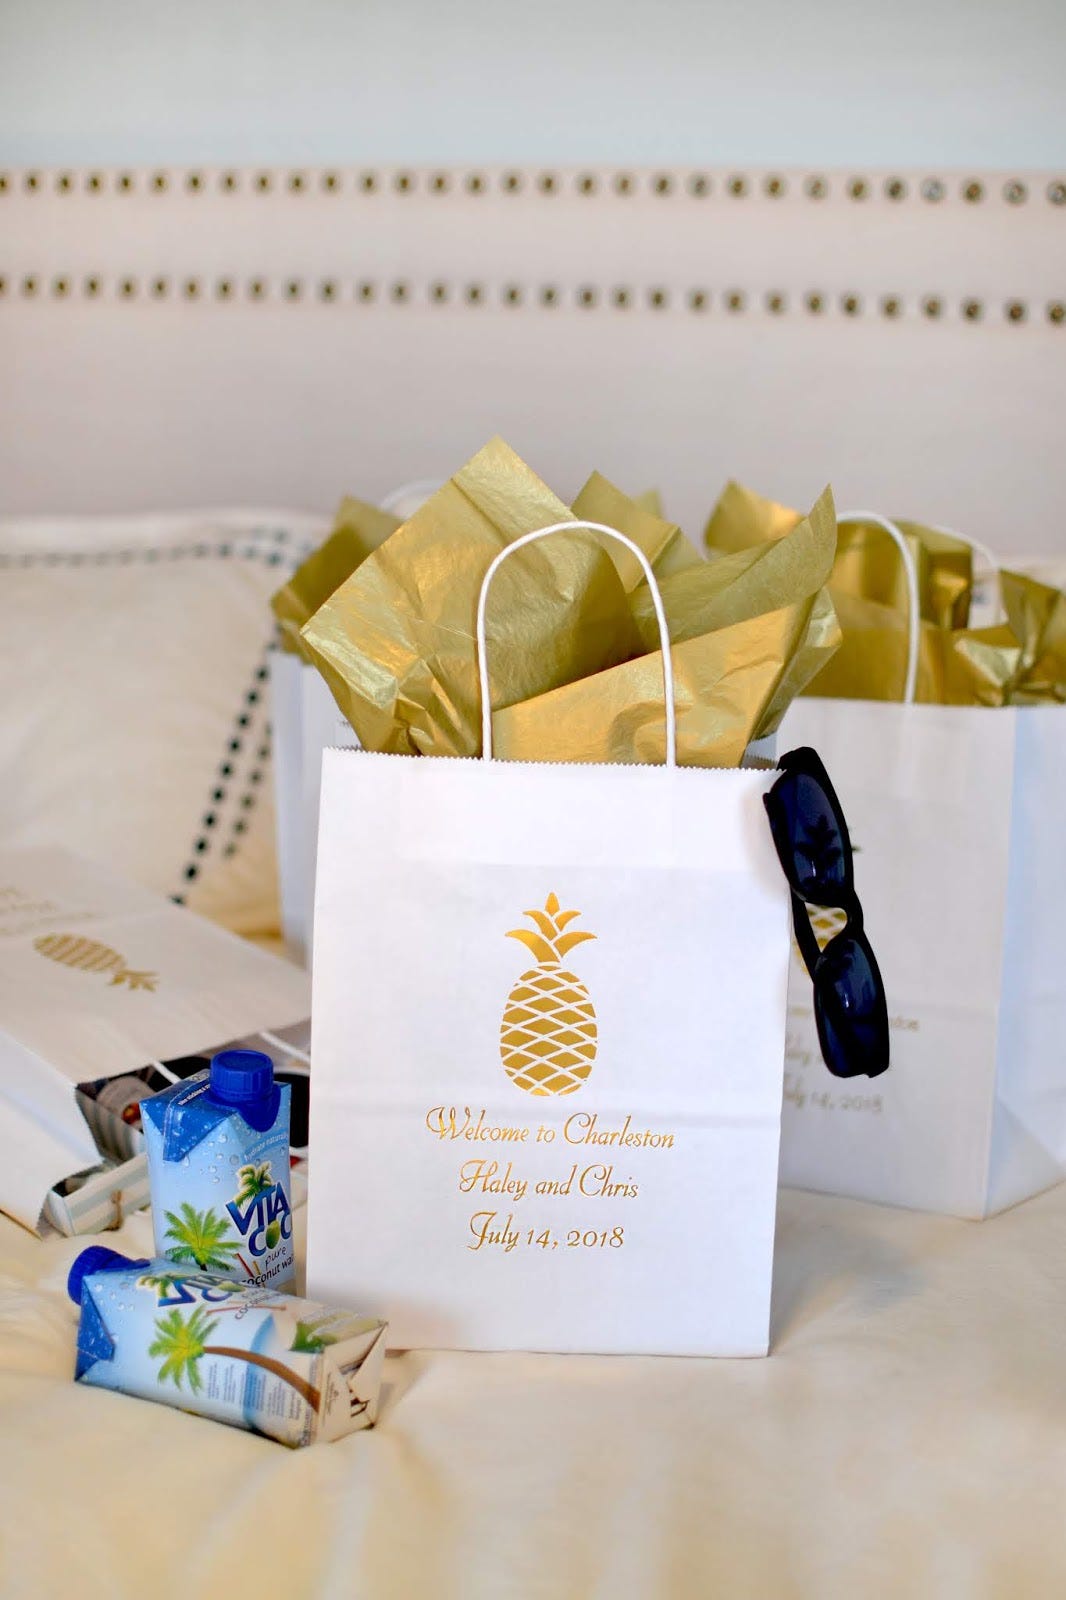 We love a good wedding DIY! Welcome bags are a great way to